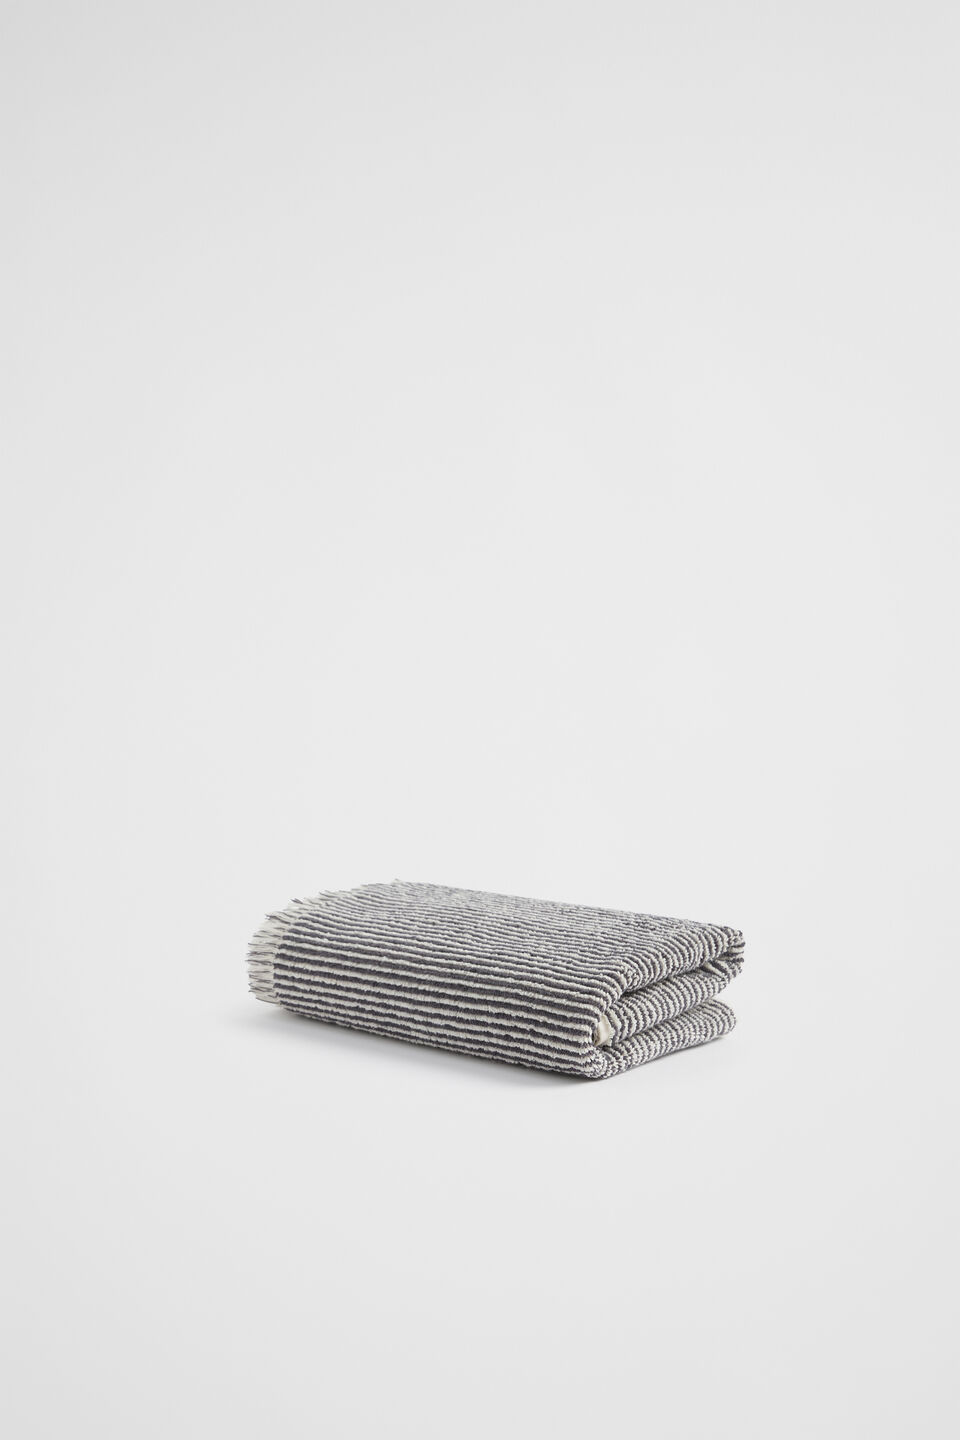 Stripe Textured Hand Towel  Charcoal